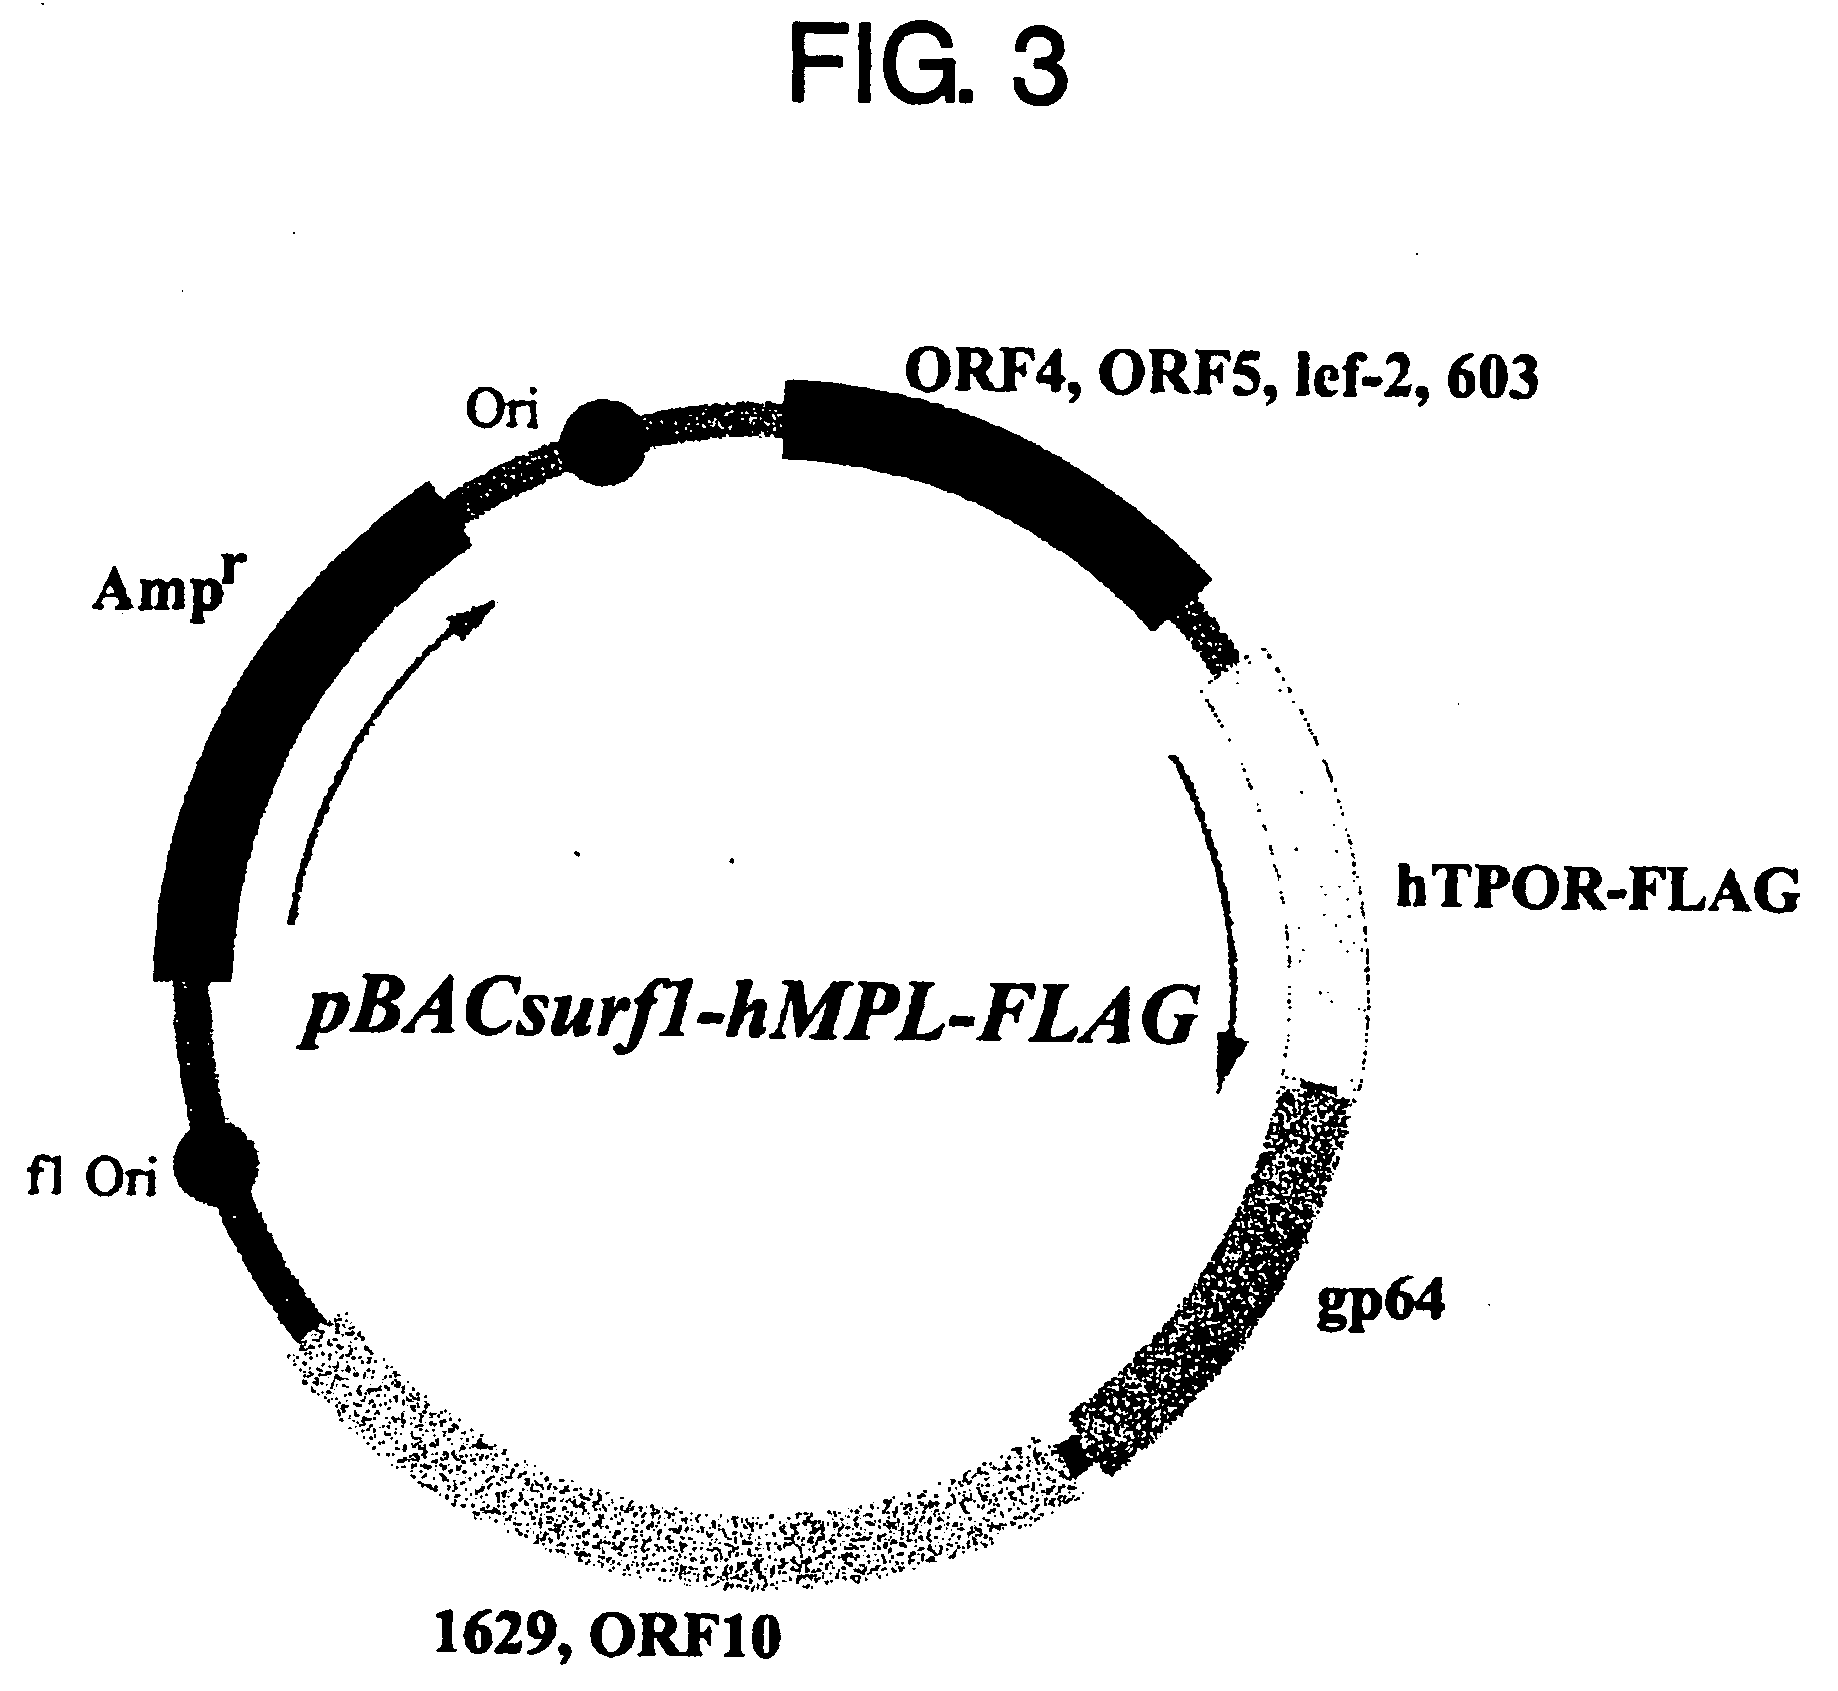 Ligand having agonistic activity to mutated receptor